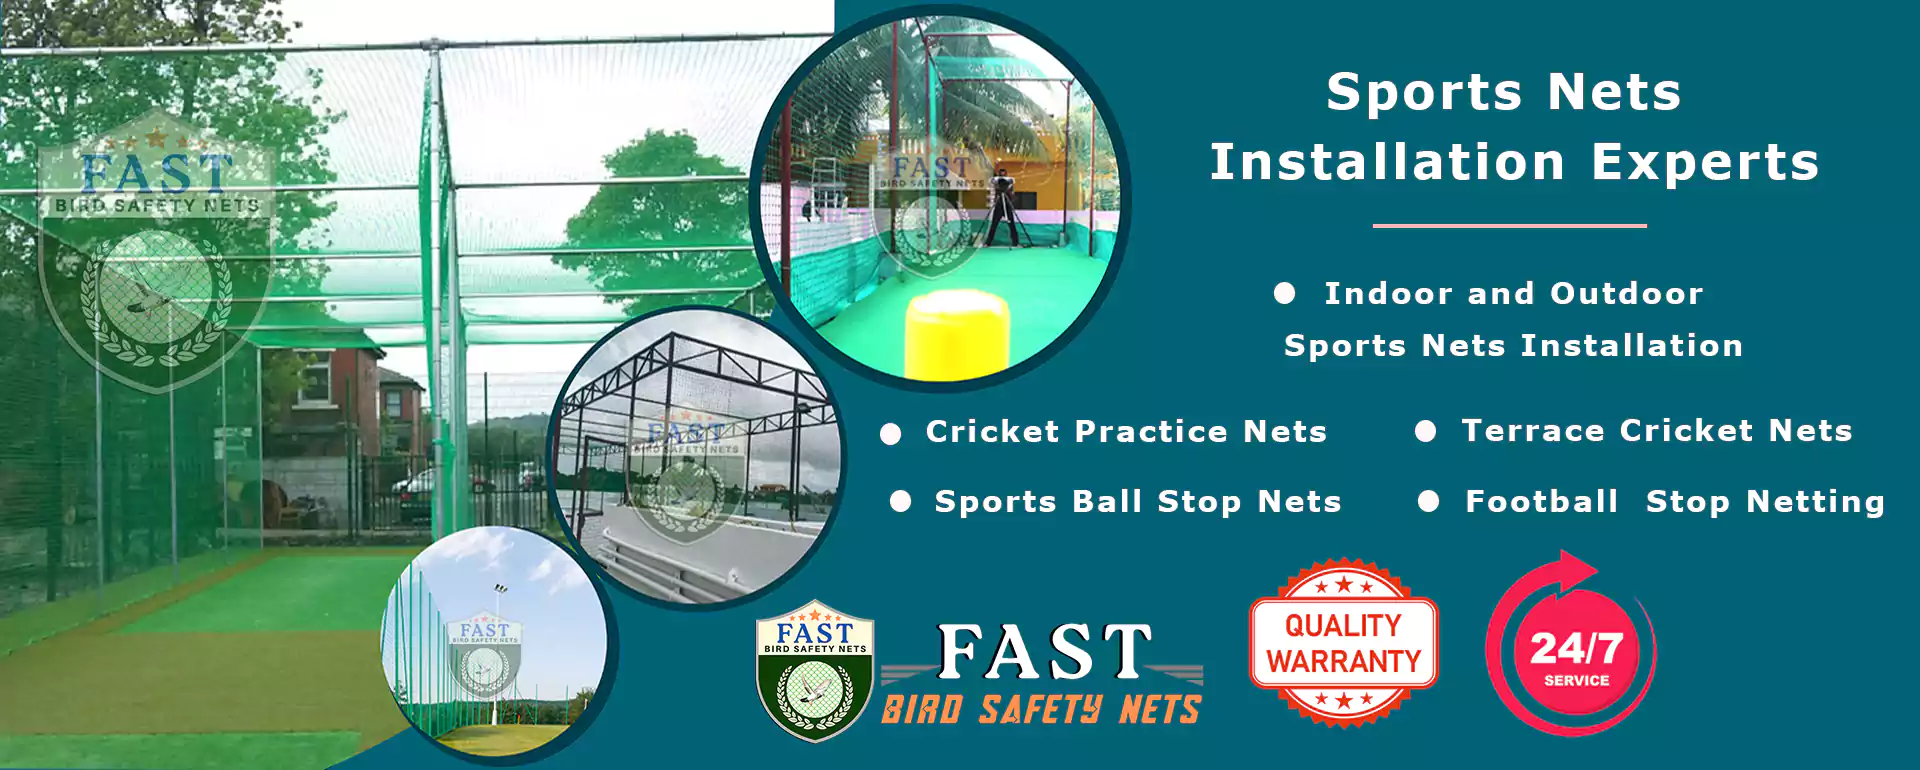 Sports Nets Installation in Hyderabad  Call Us 91 9363632161